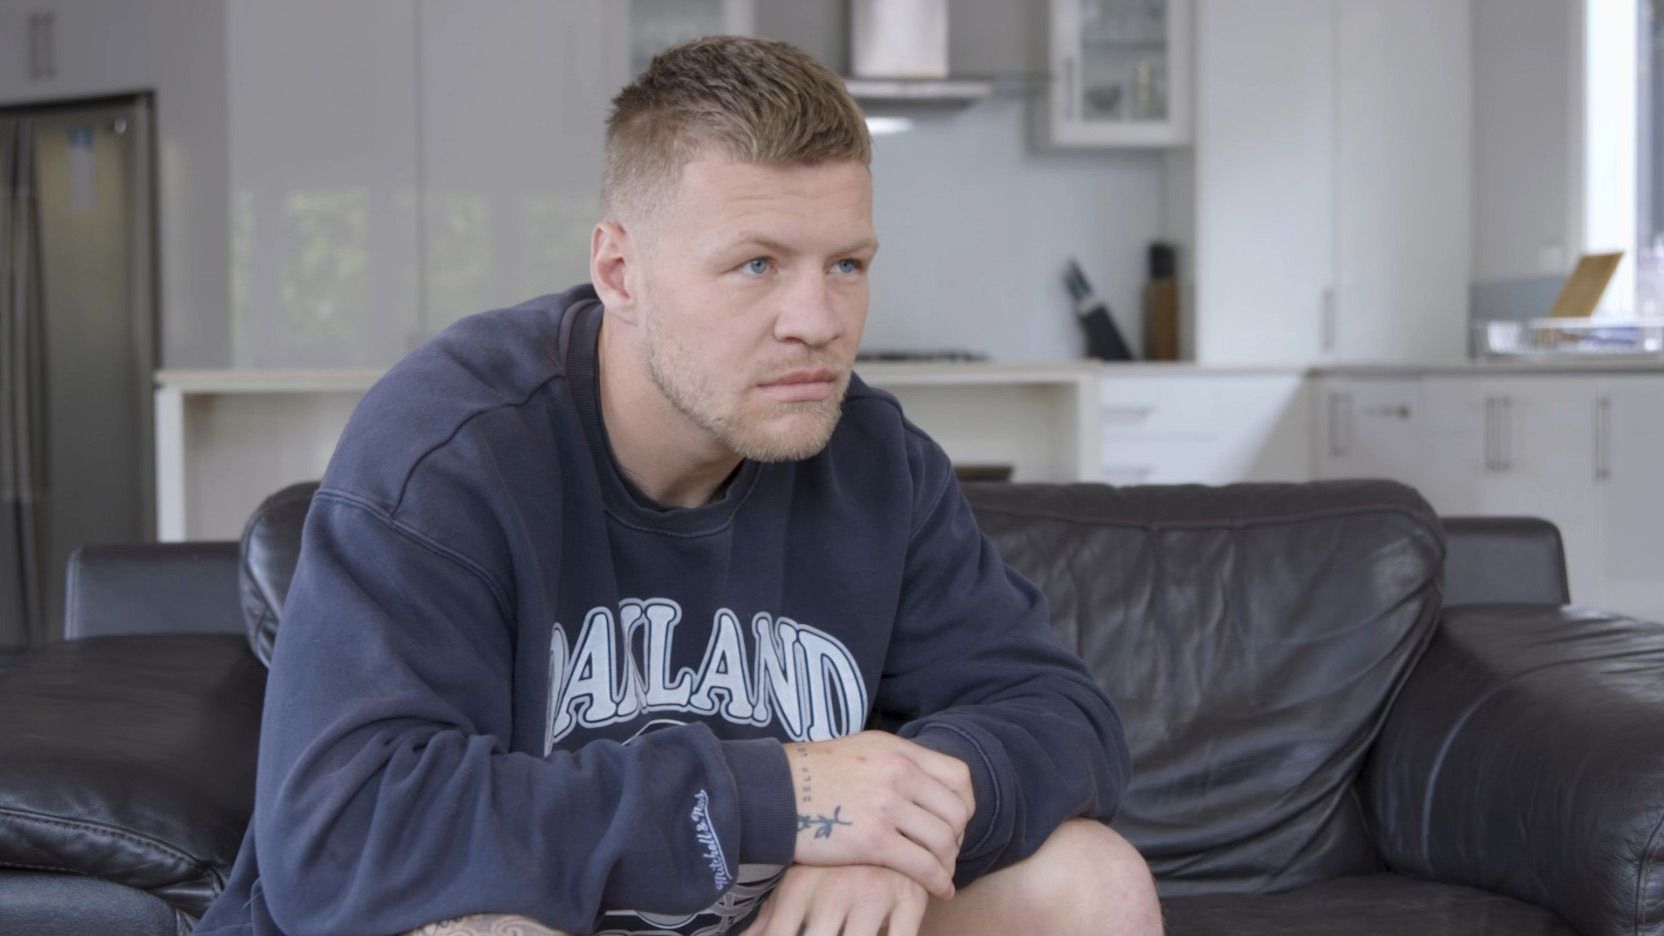 Controversial Collingwood star Jordan De Goey records video apology after Bali scandal